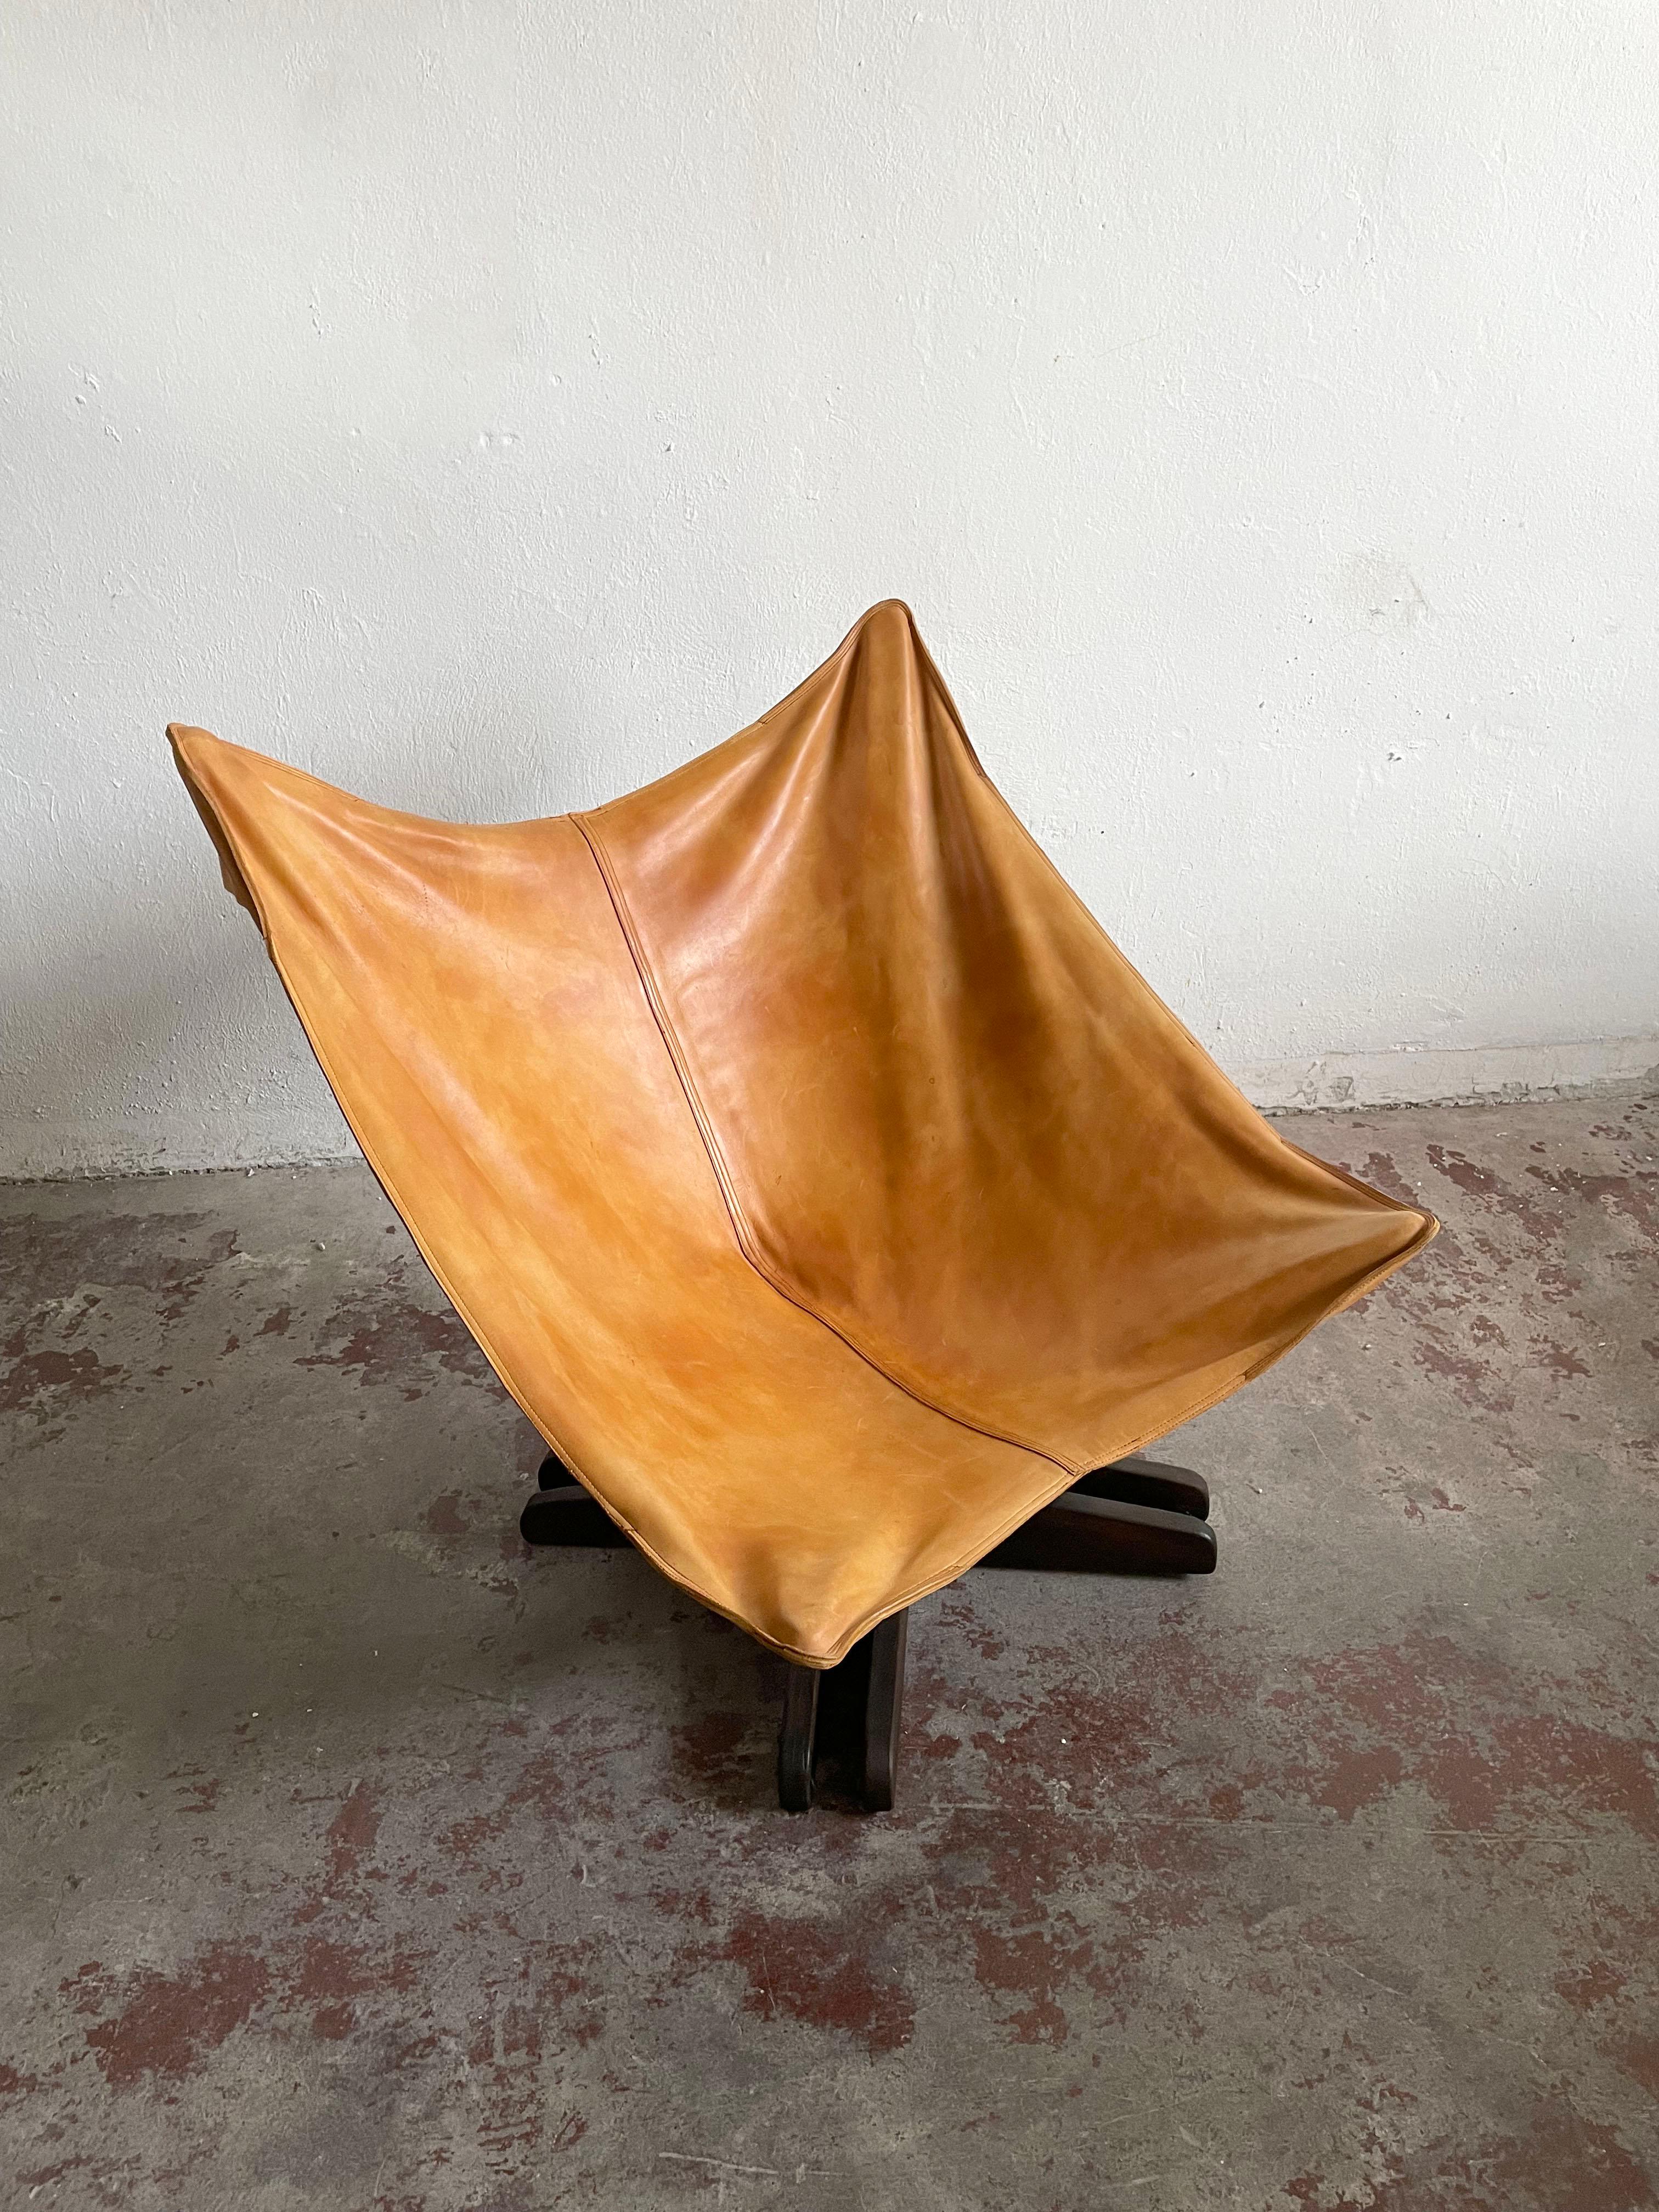 Beautiful vintage butterfly lounge chair with caramel-color leather seat and wooden frame

Unknown designer/maker, Might be an artisanal piece

Age: 1960s/1970s

Size: 95 x 92 x 90 cm (H/W/D), 29 cm is the height of the seating
Weight: 10